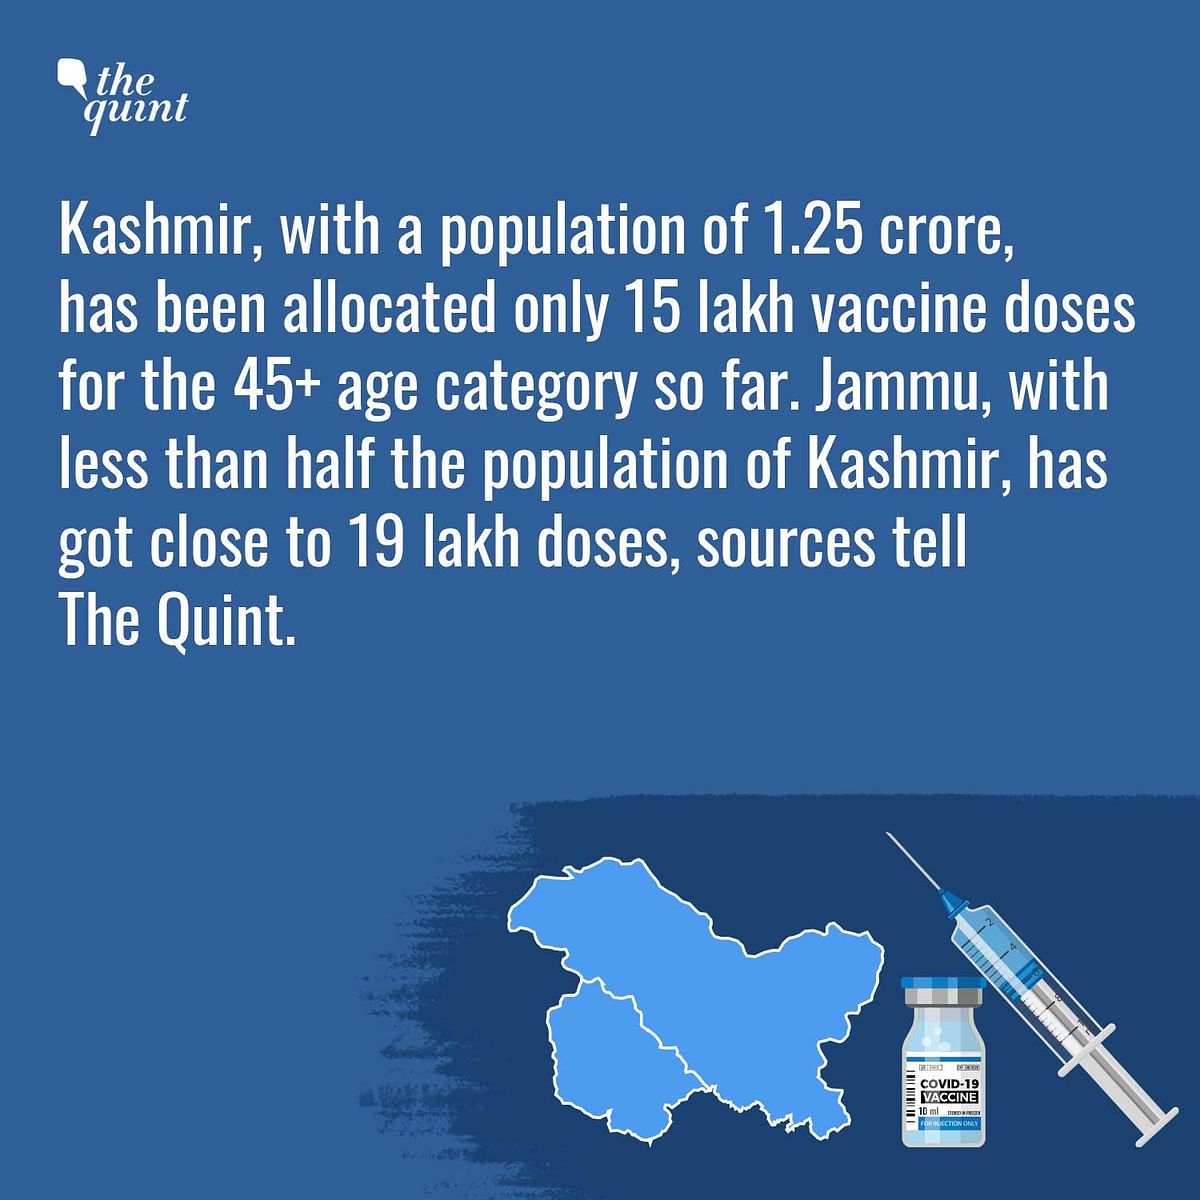 In 10 days, of 1.3 lakh vaccine doses consumed by J&K, 1.16 lakh vaccines were administered to Jammu alone.